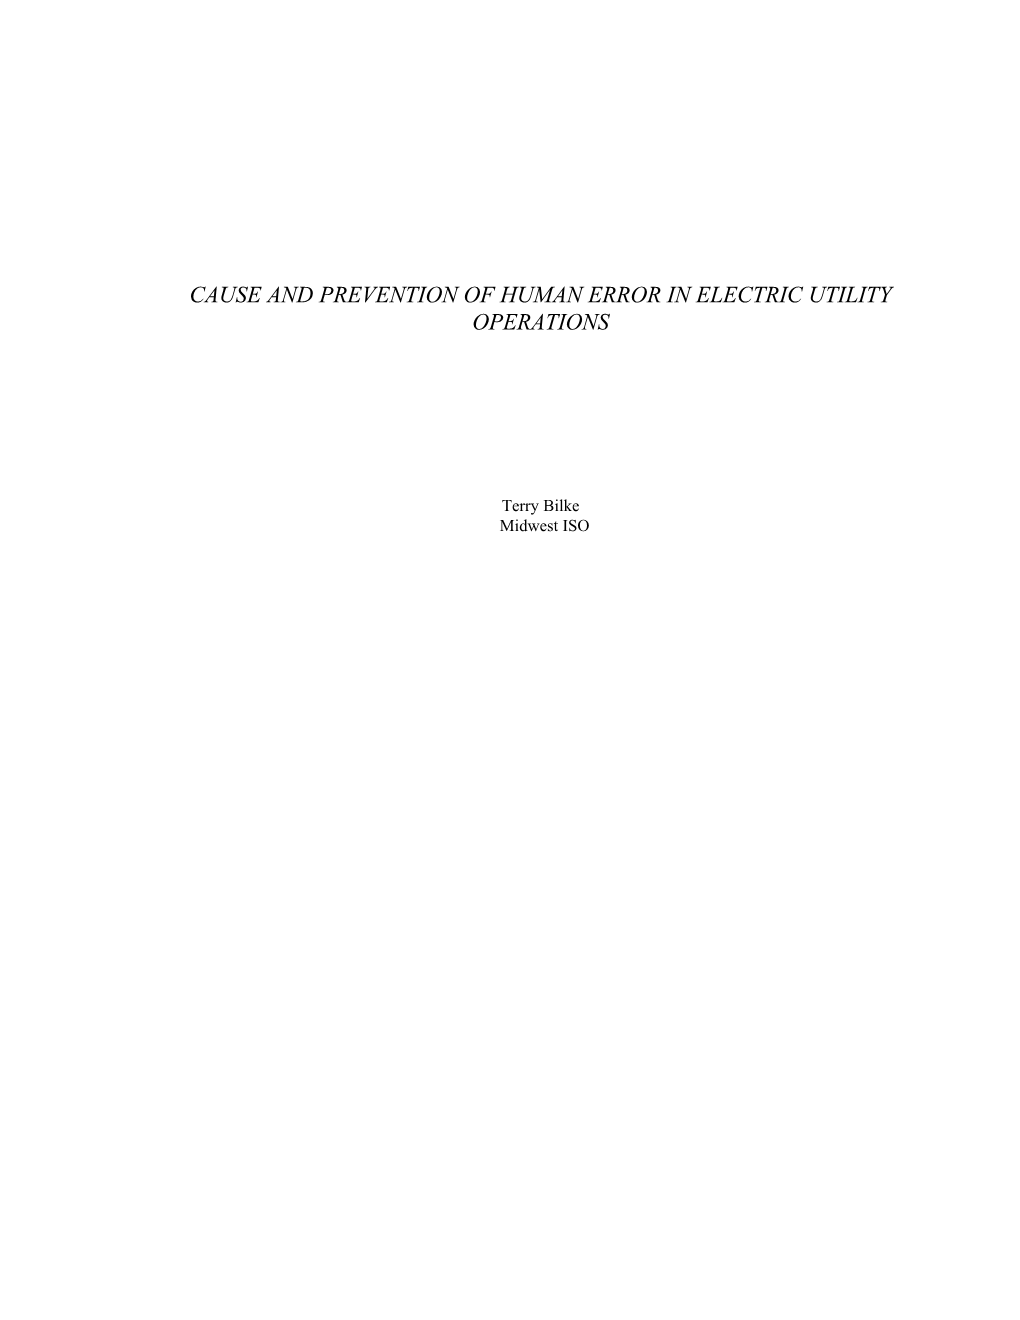 Cause and Prevention of Human Error in Electric Utility Operations